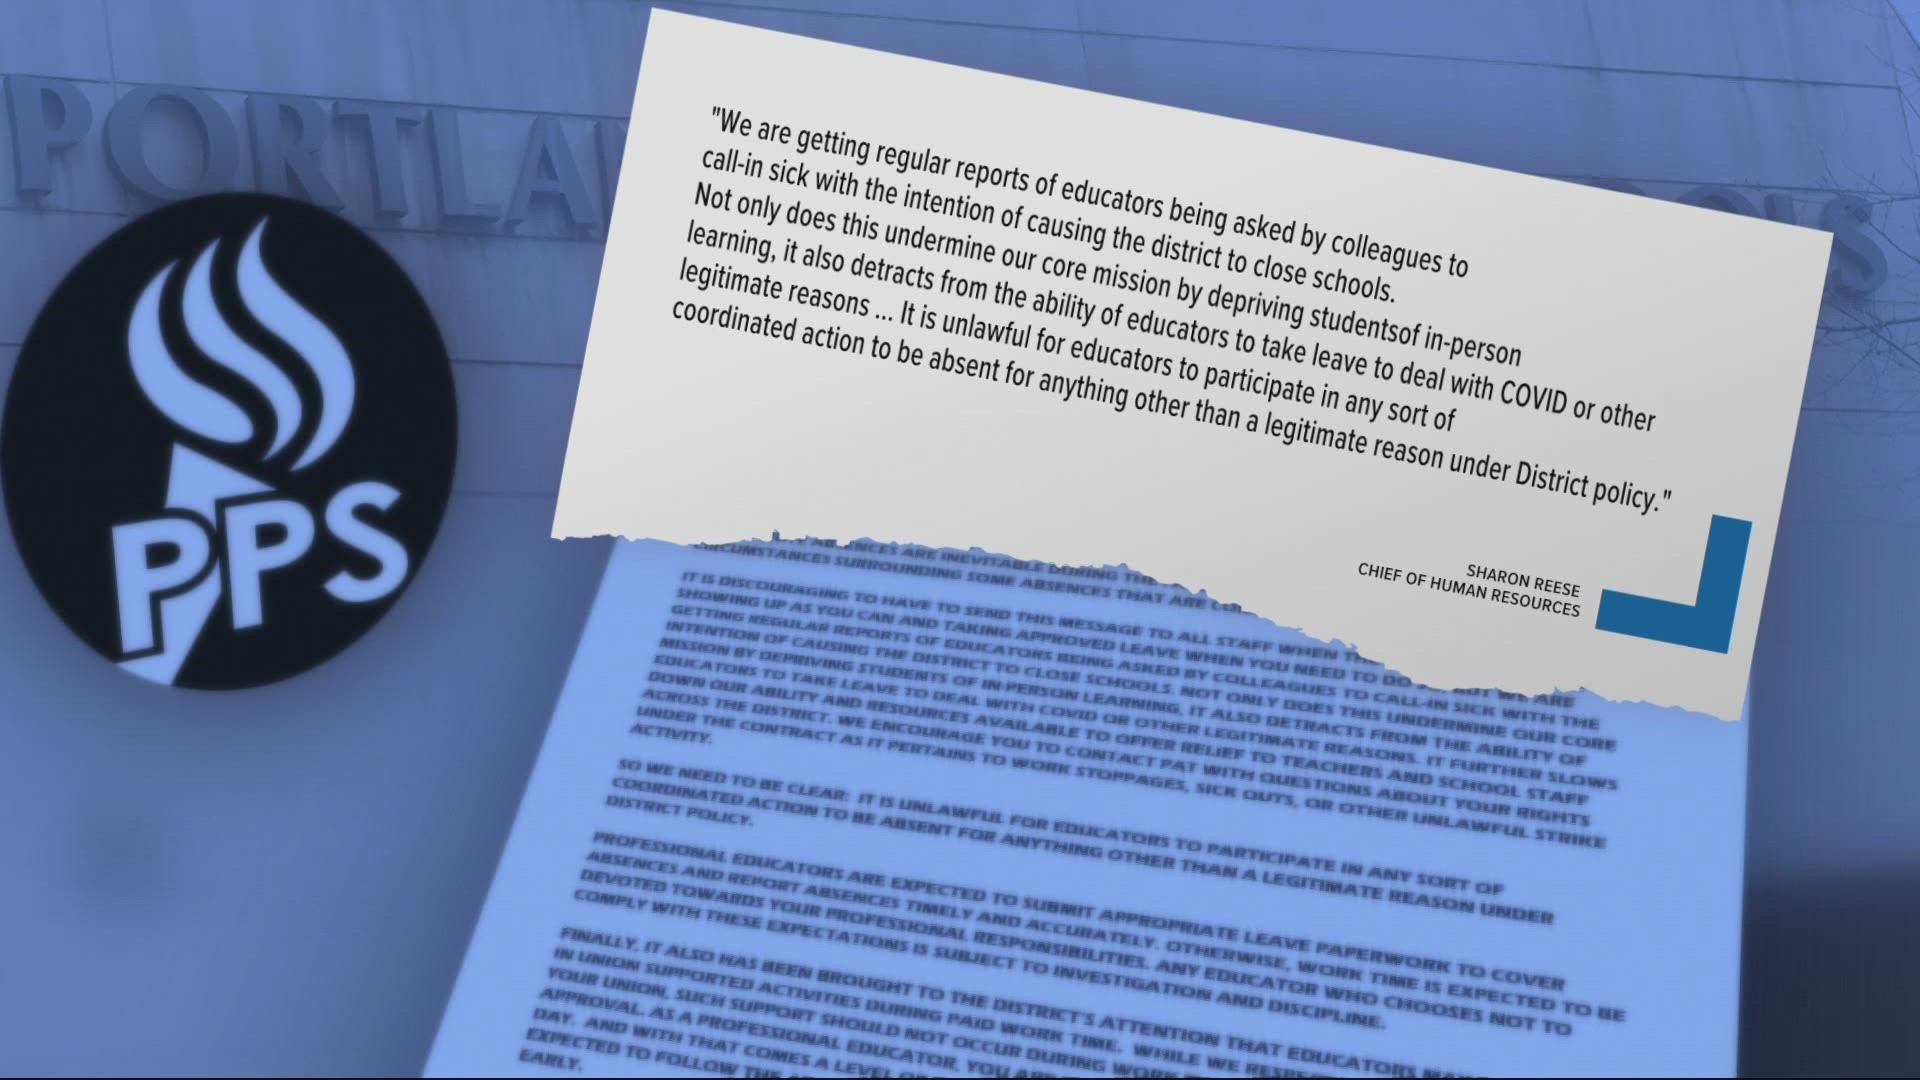 Dozens of nurses across the district signed an open letter blasting administrators for sending a memo accusing teachers of coordinating sick calls.